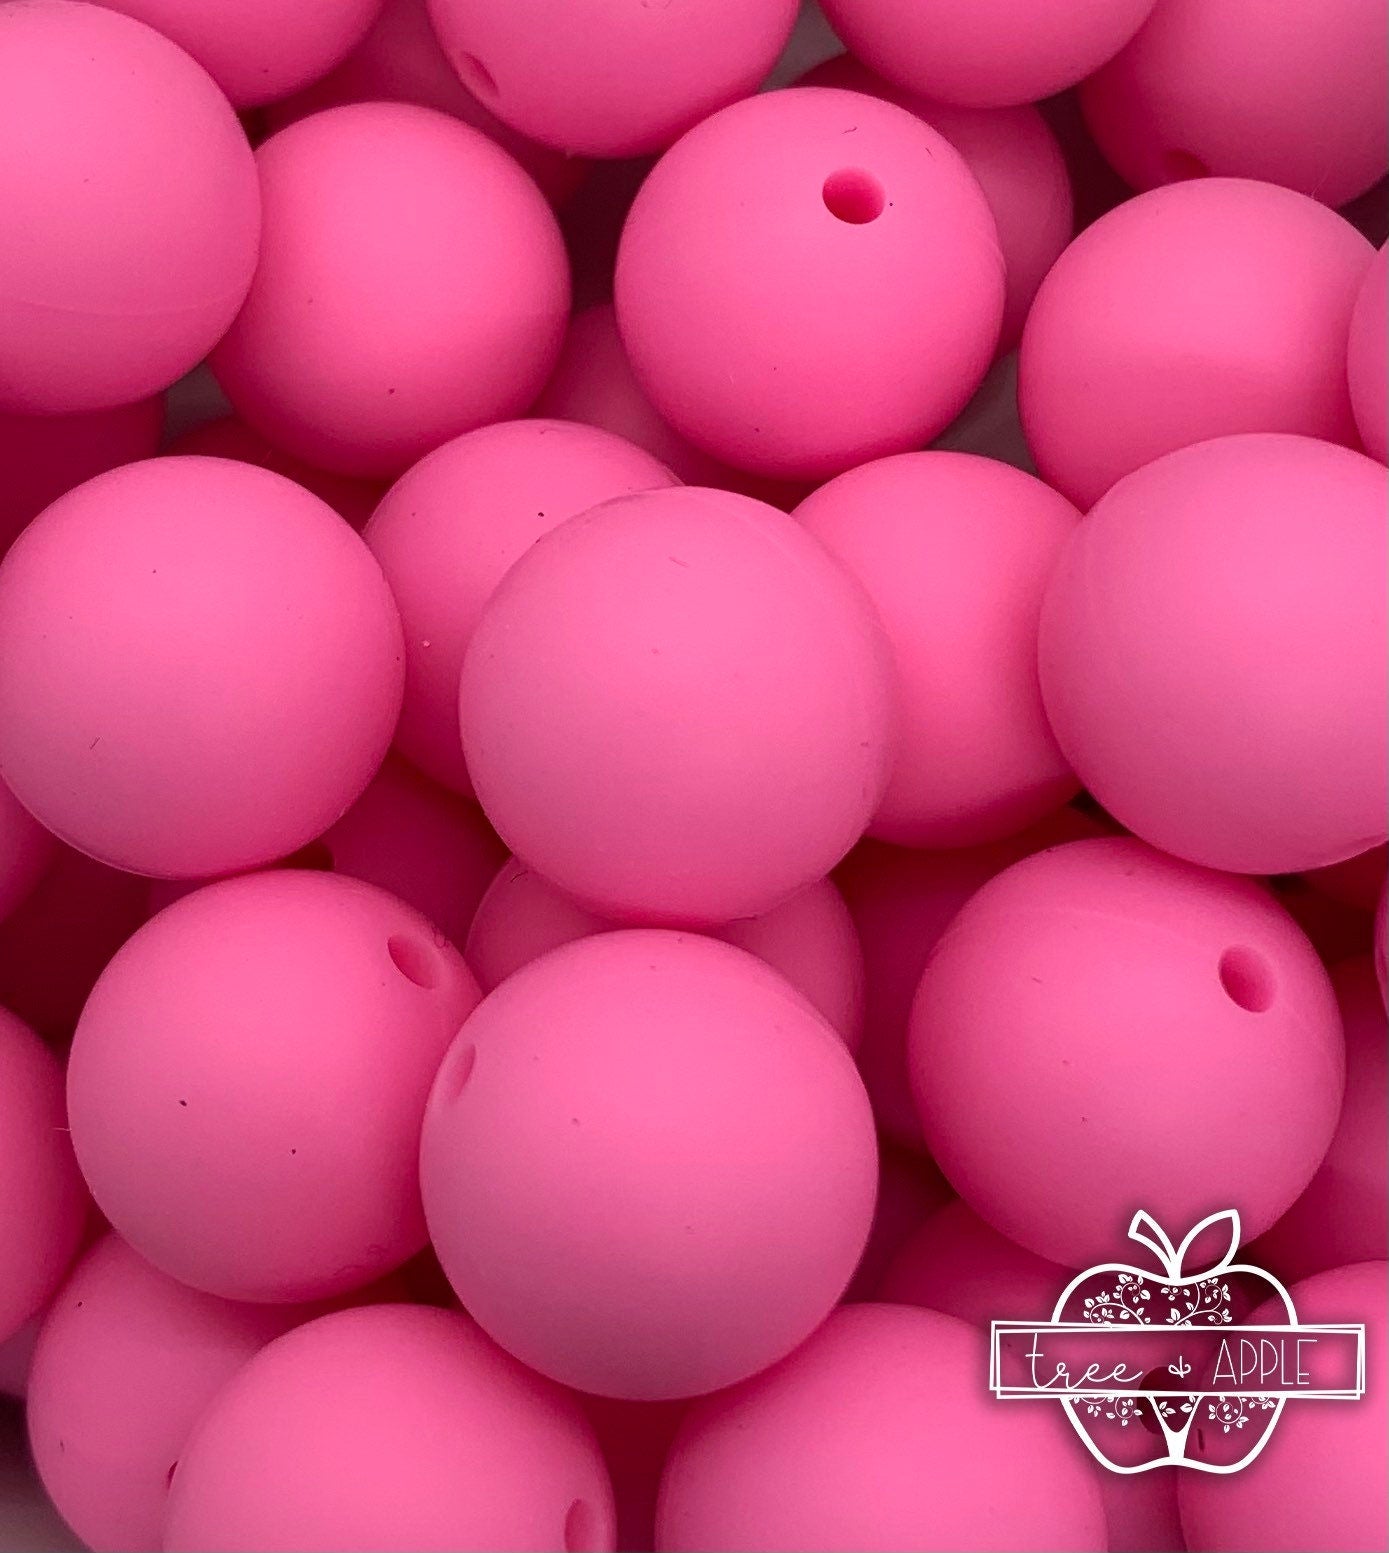 15mm Soft Pink Silicone Beads, Pink Round Silicone Beads, Beads Wholesale